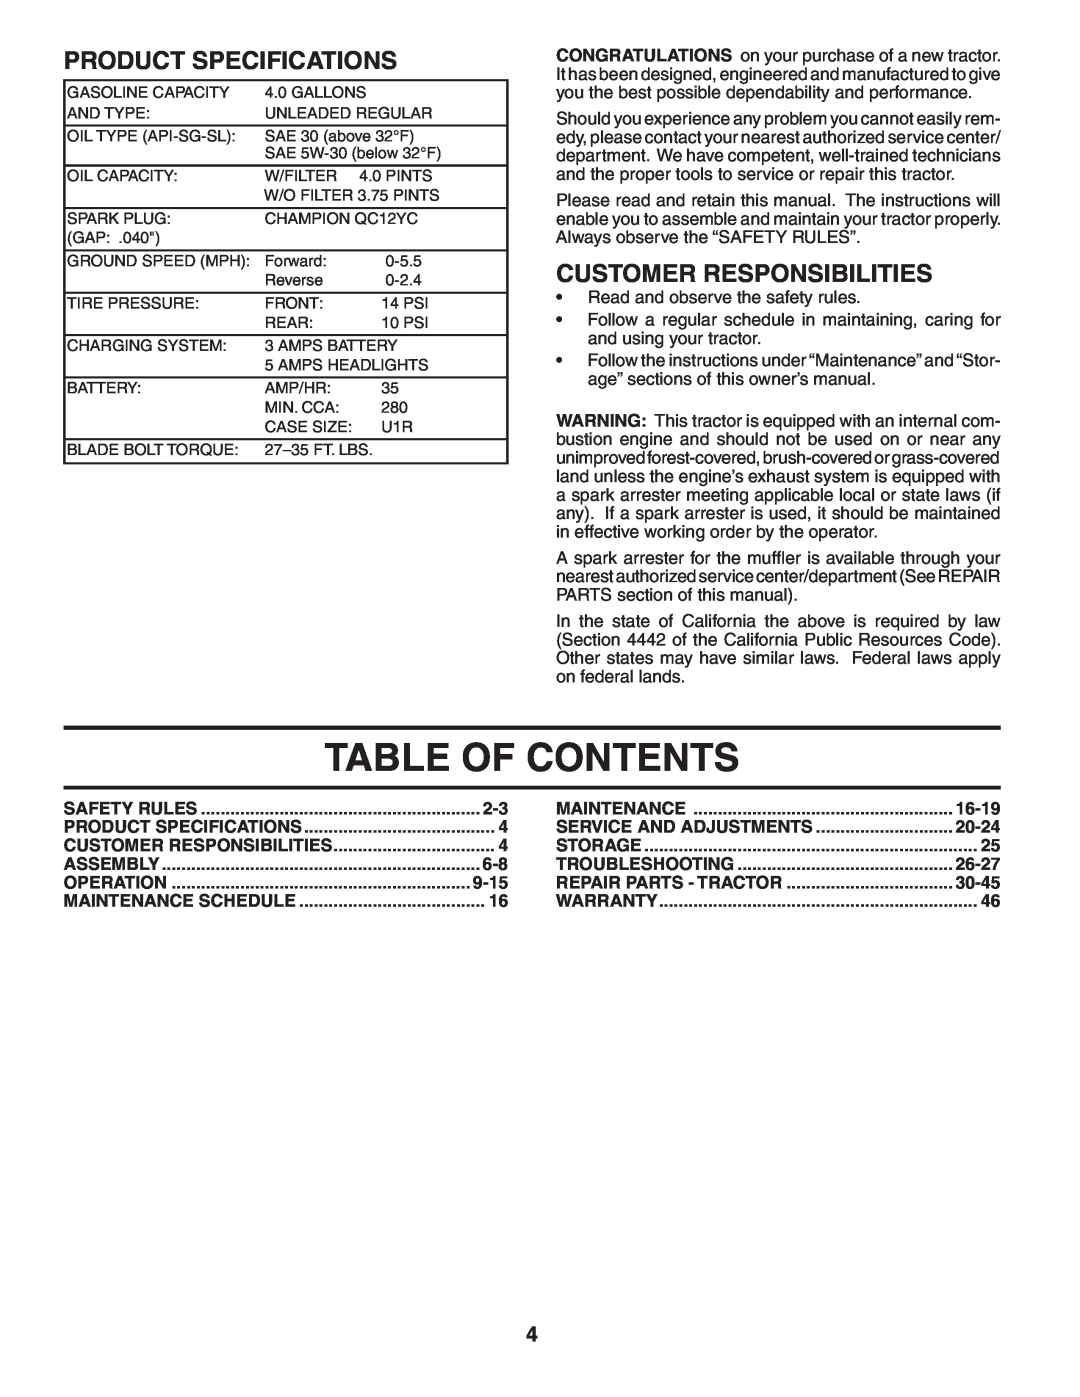 Poulan PD22H42STC owner manual Table Of Contents, Product Specifications, Customer Responsibilities 